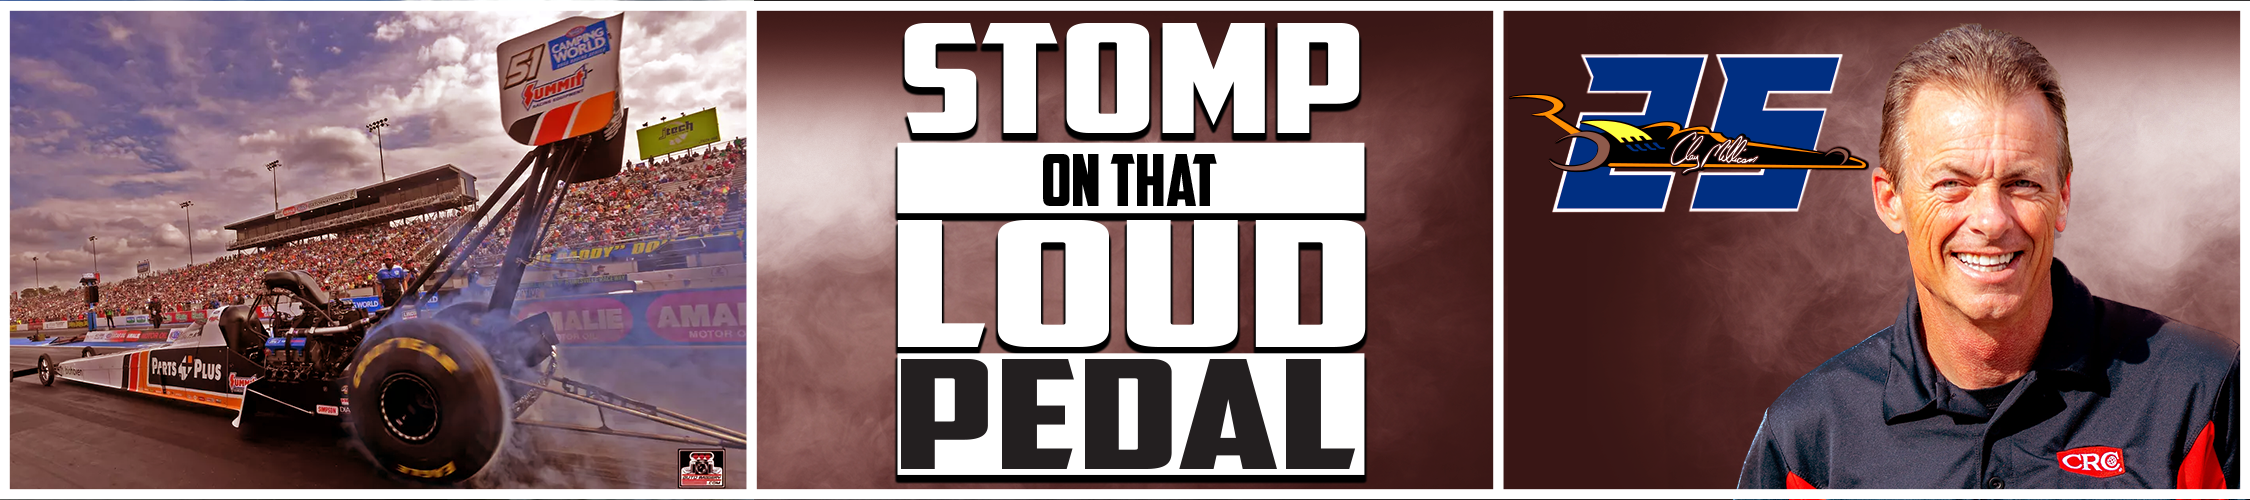 Stomp On That Loud Pedal